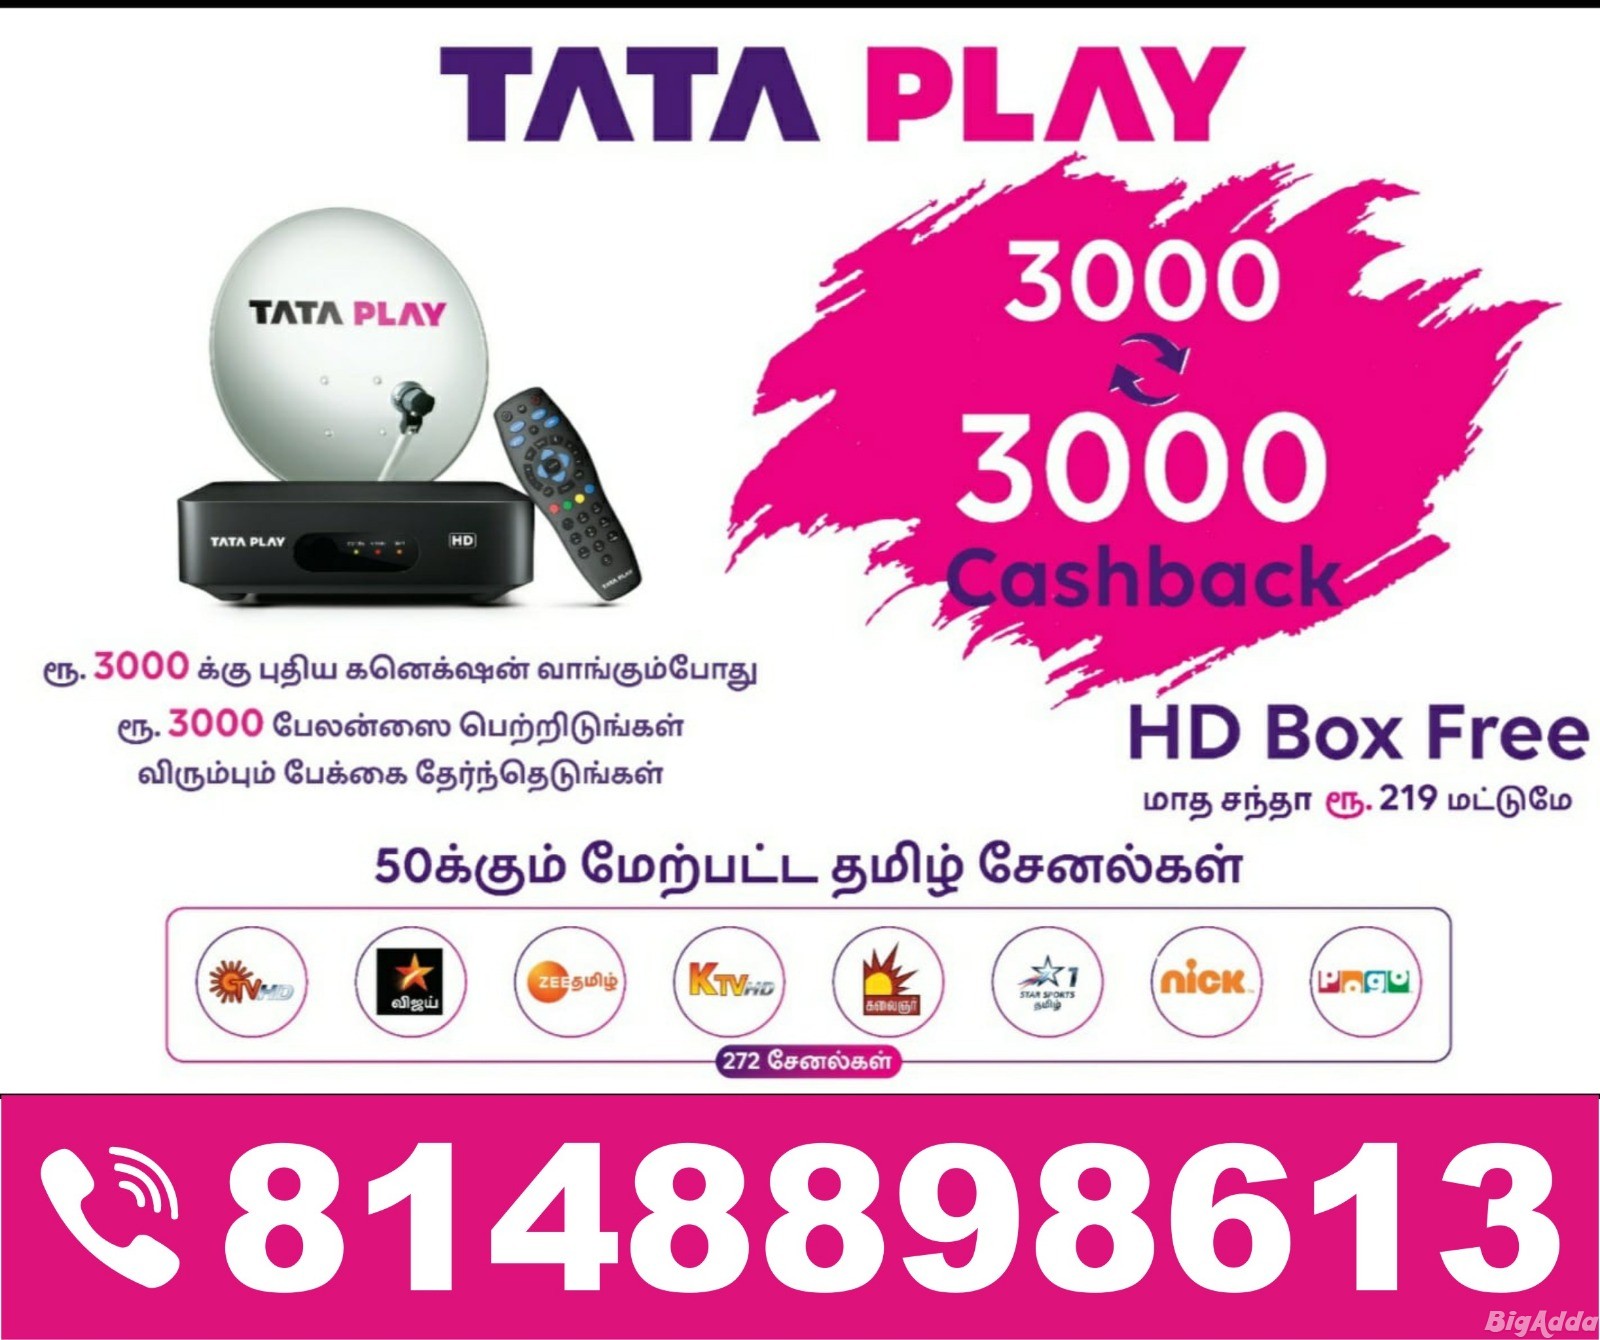 Tata play new connection Dindigul 81488 98613